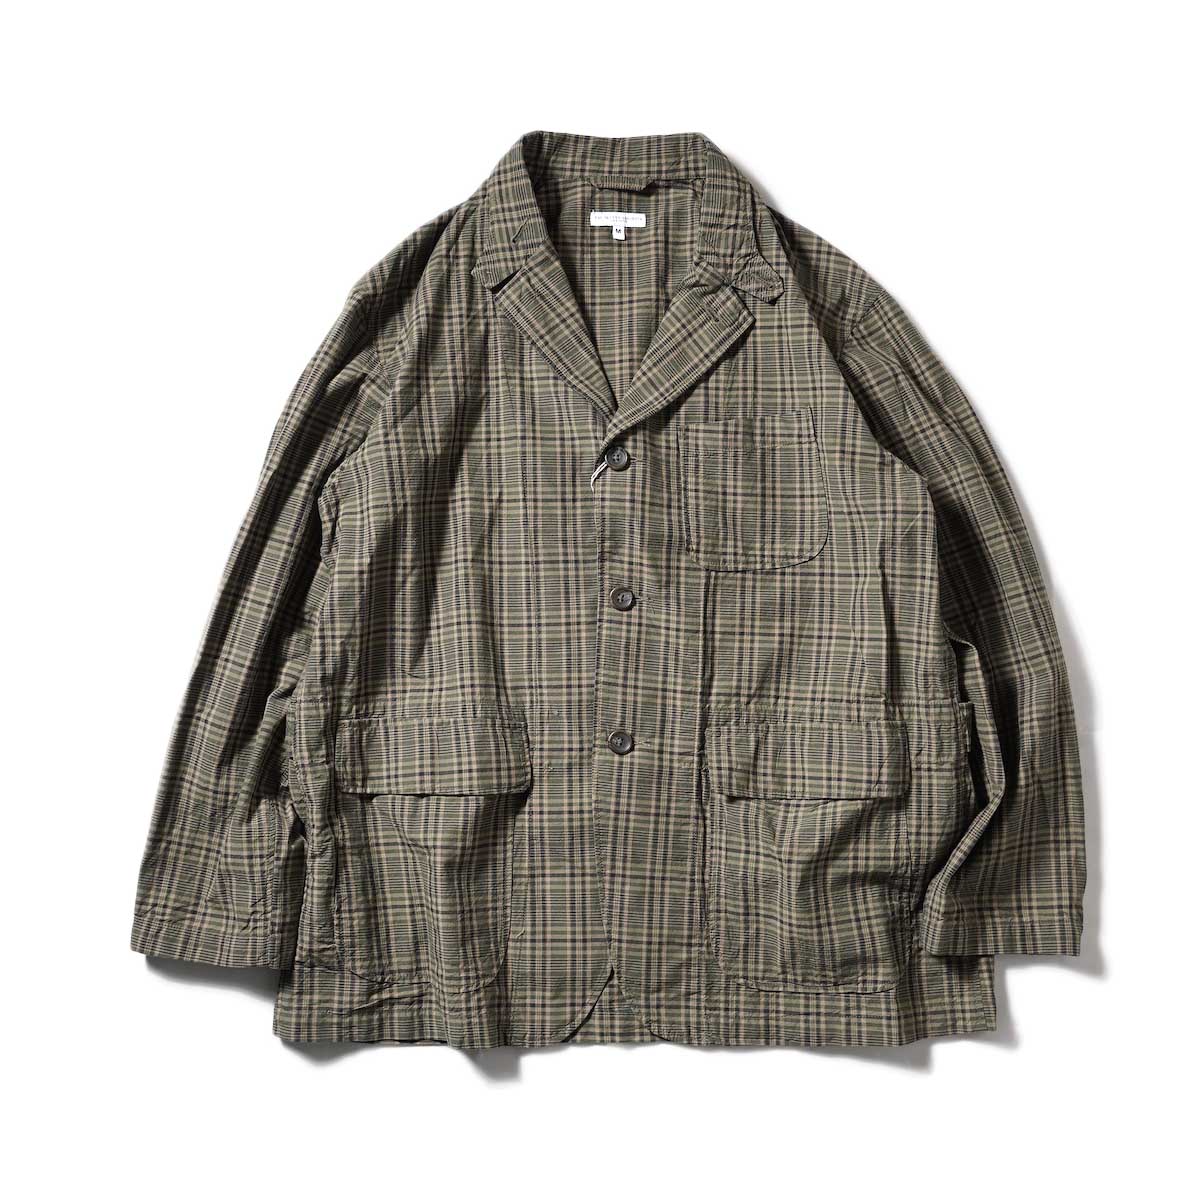 Engineered Garments / Loiter Jacket - Cotton Madras Check (Olive/Brown)